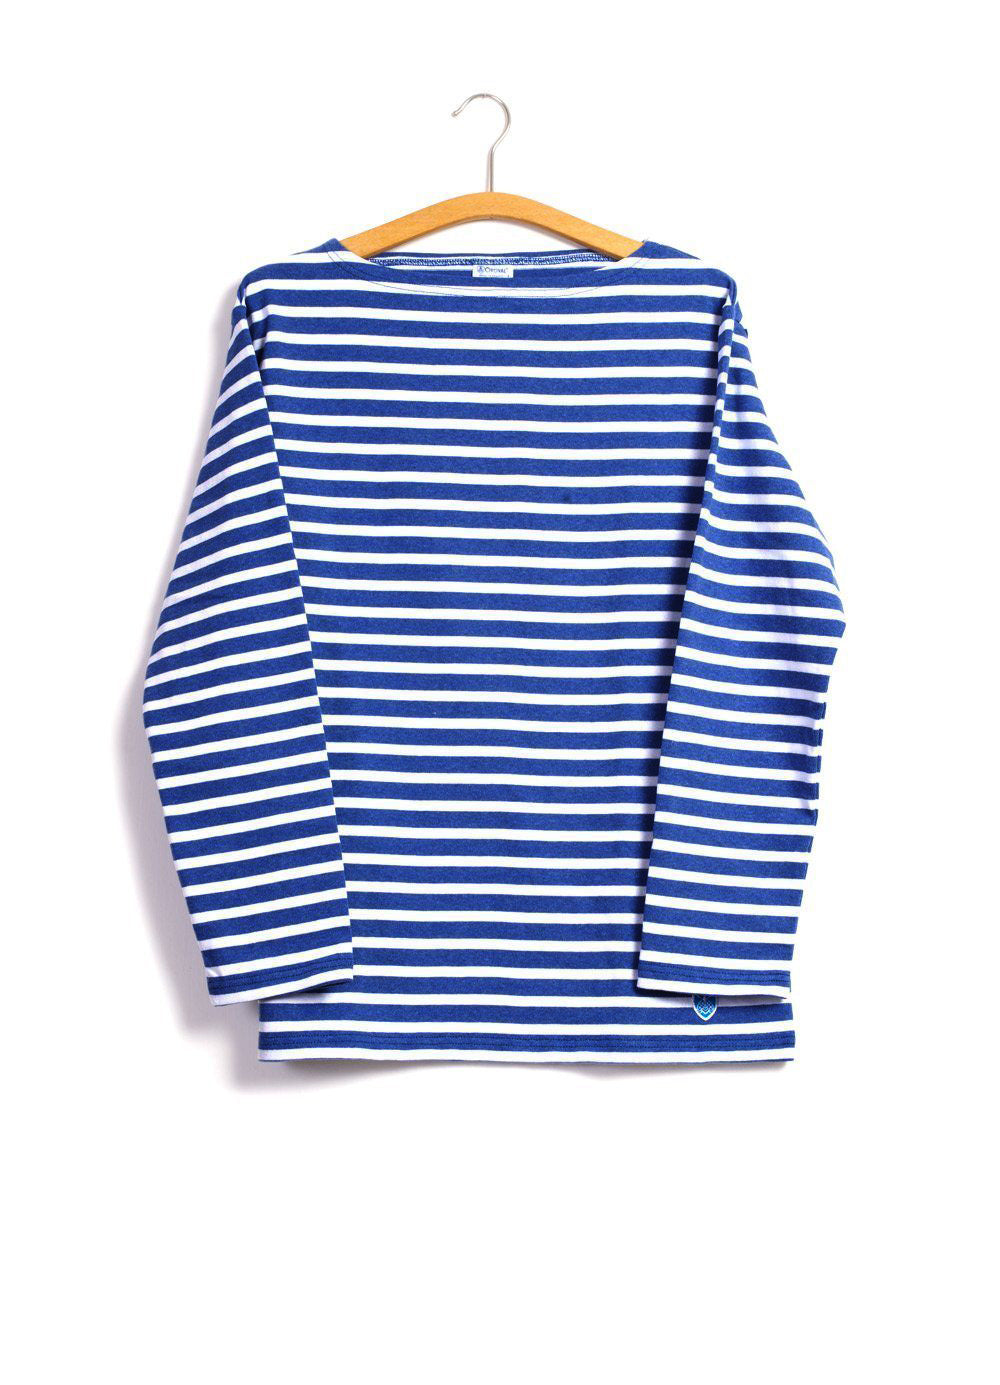 MARINE NATIONALE | Striped T-shirt | Peacock White